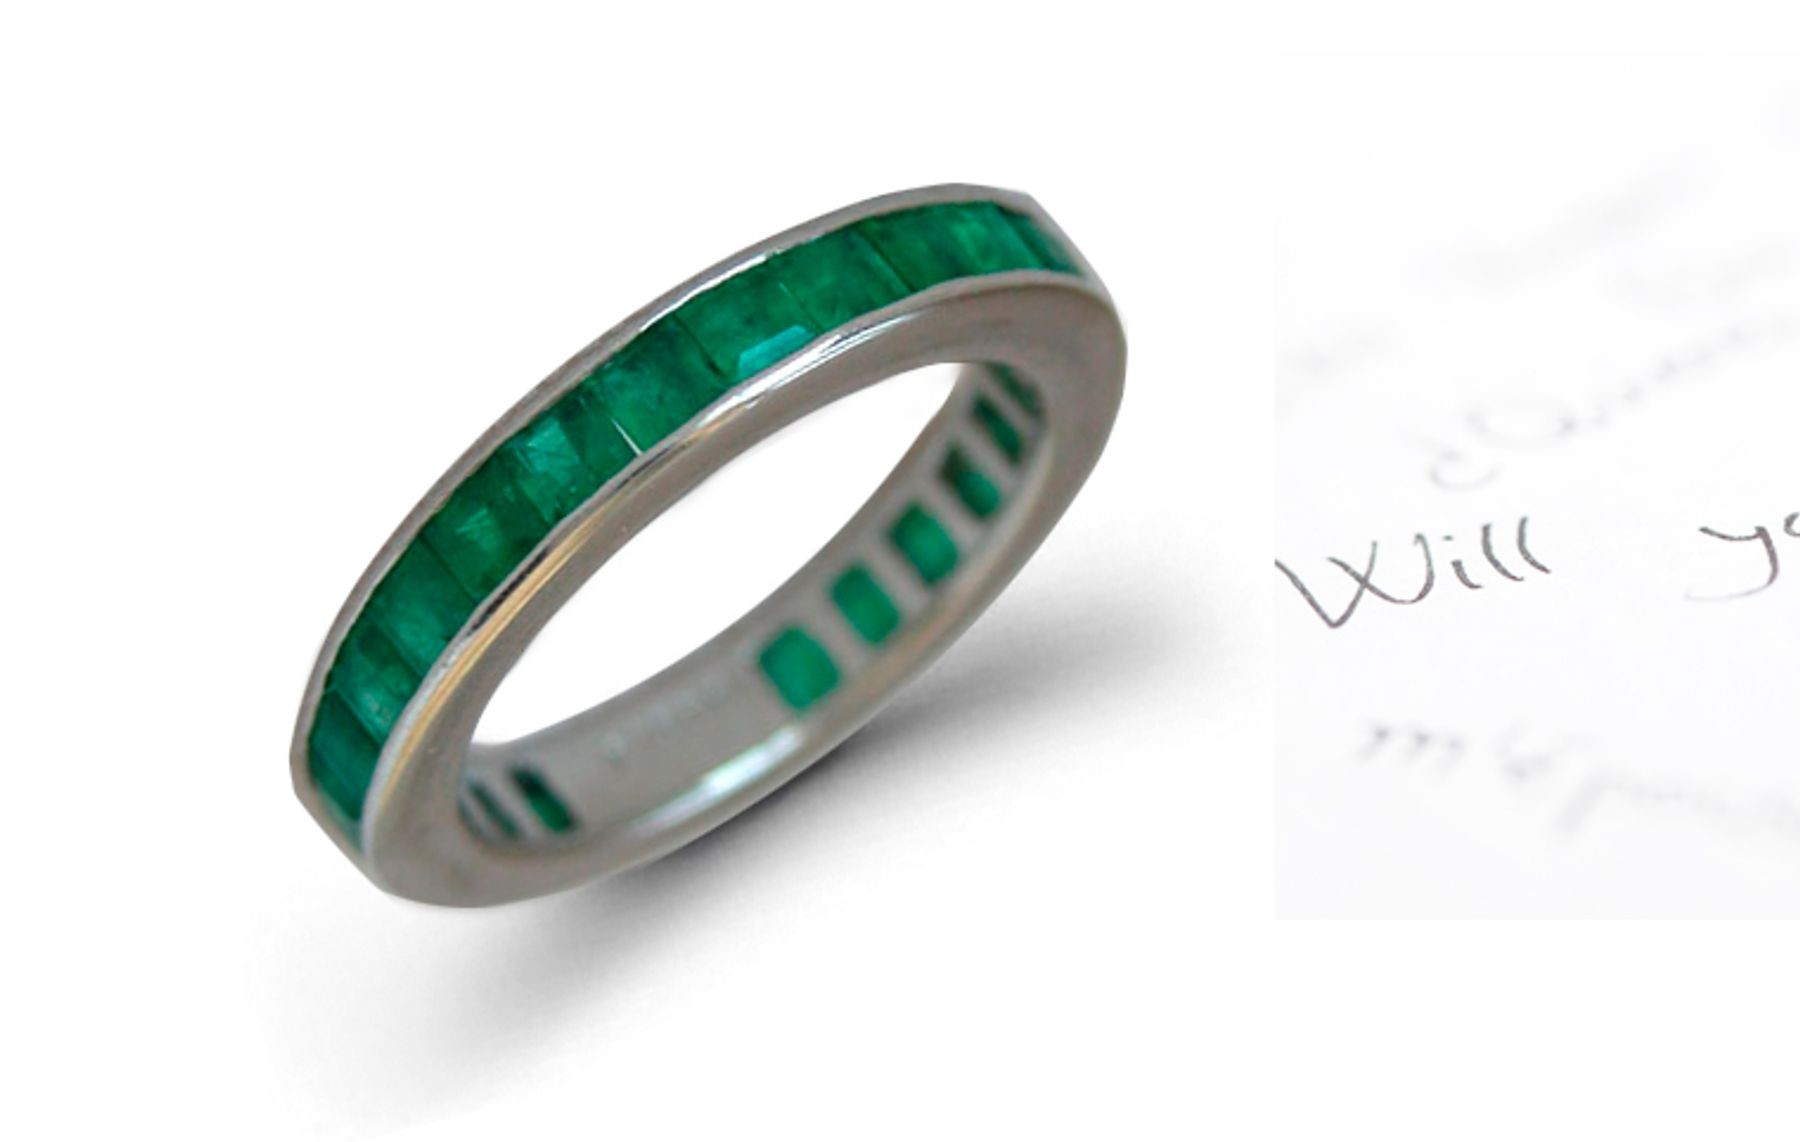  Emerald Eternity Band: Stylish Emerald Square and Princess Cut Diamonds Channel Set Rings in 14K White Gold.